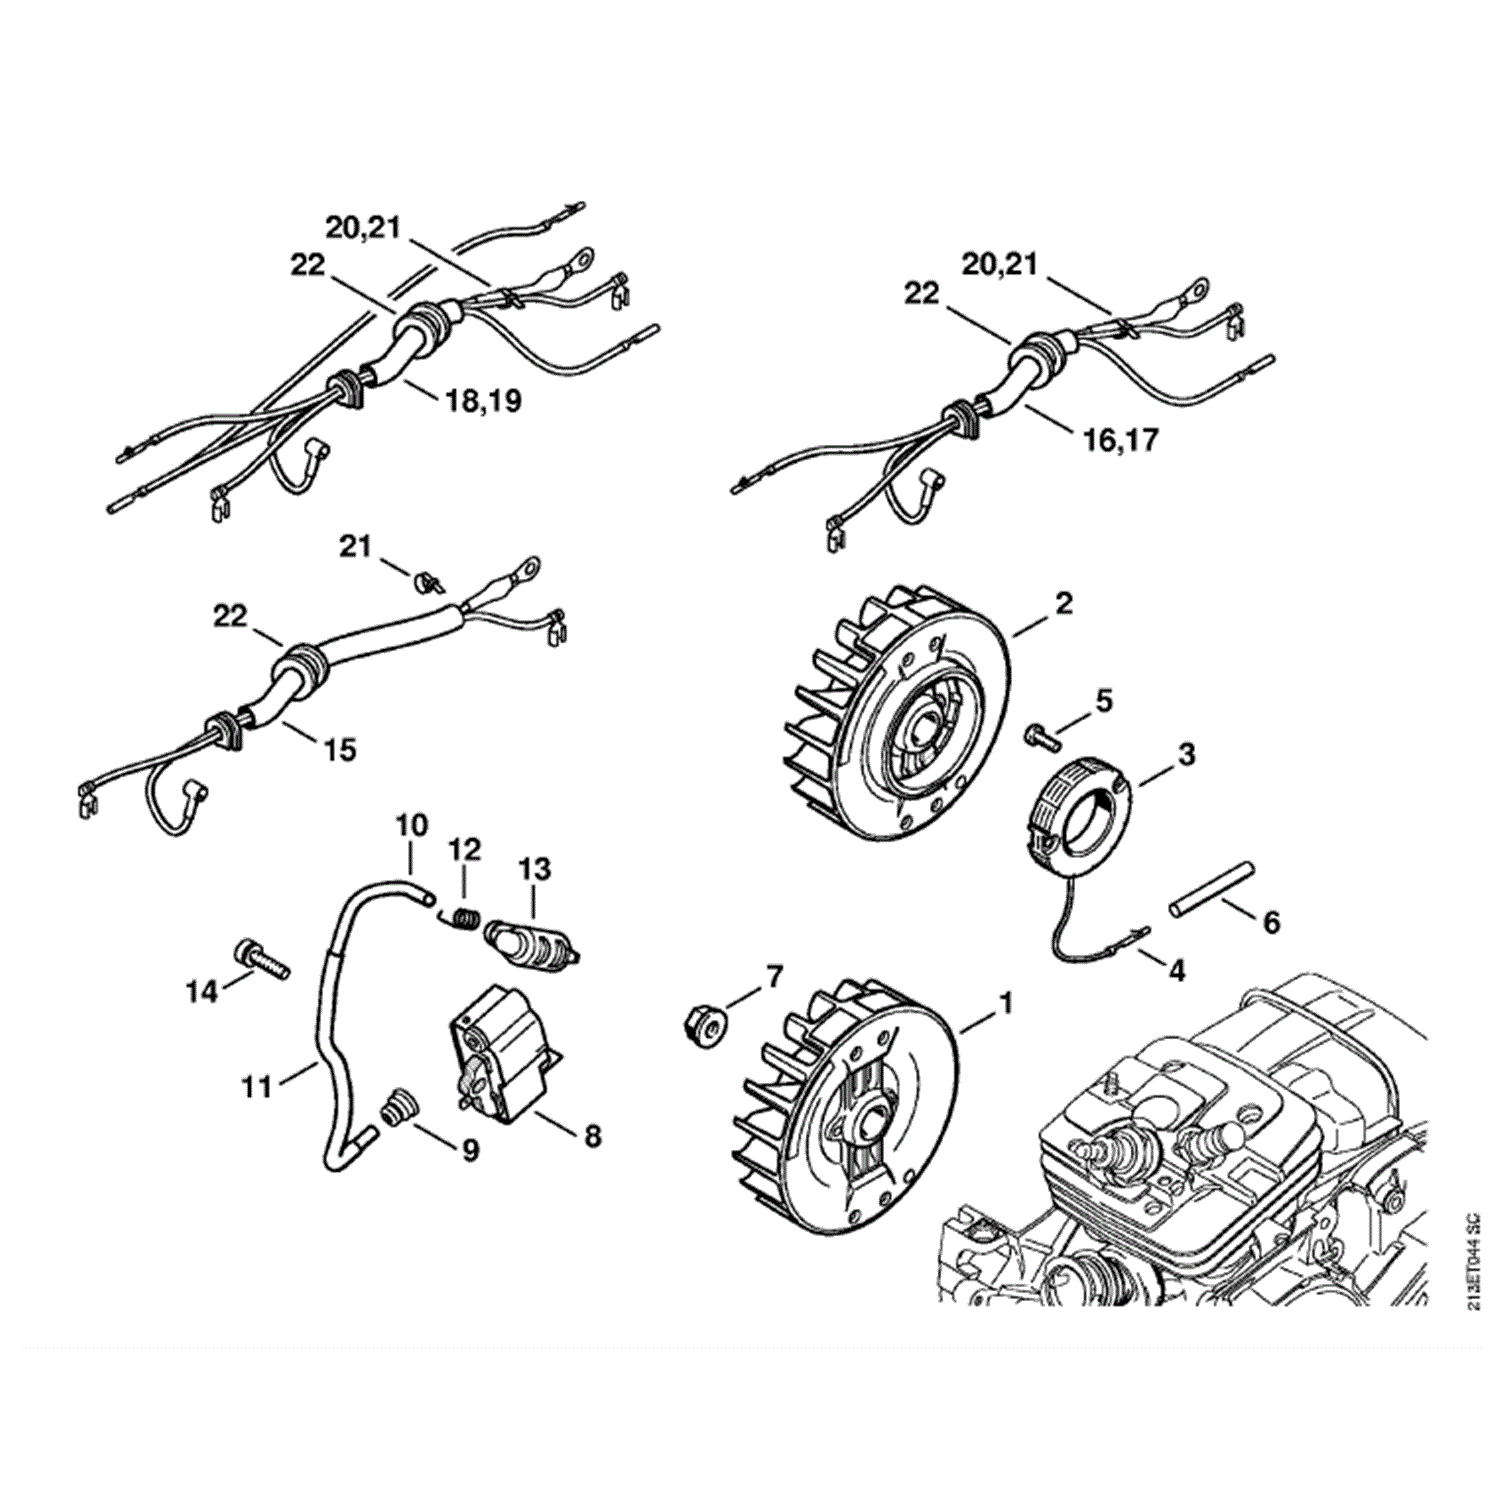 Stihl MS 361 Chainsaw (MS361) Parts Diagram, Ignition system Wiring Harness